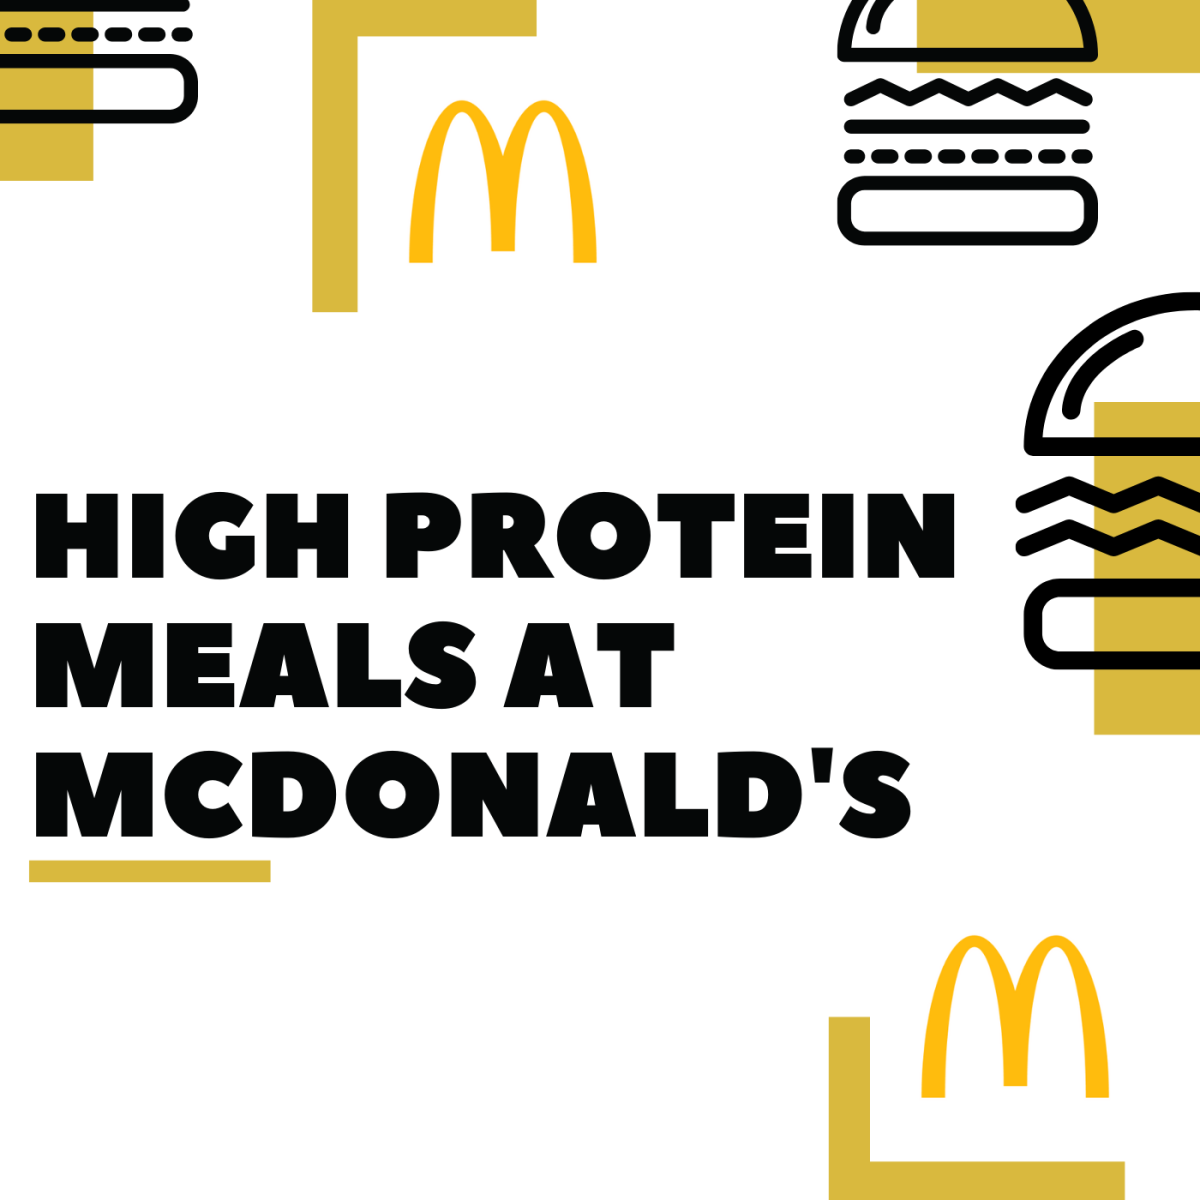 You can get high protein food even when you're on the go at McDonald's.